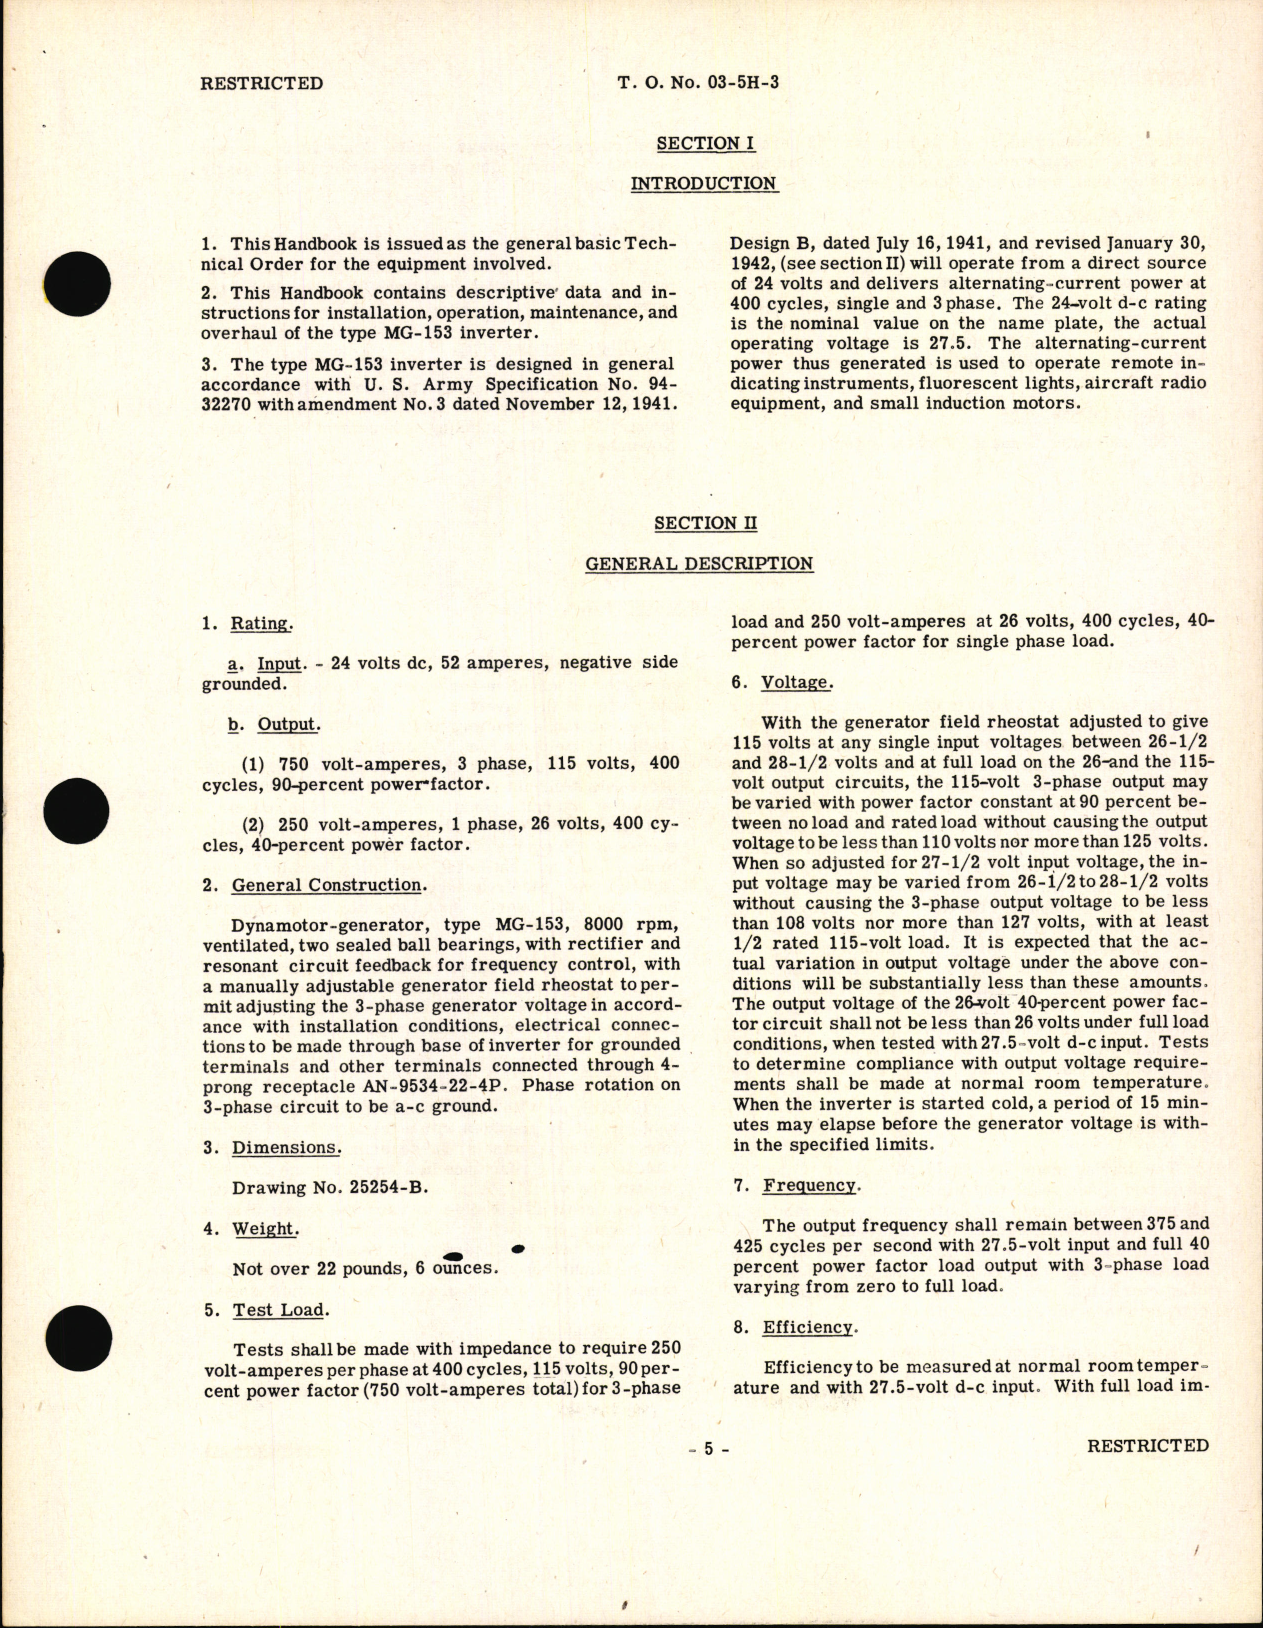 Sample page 7 from AirCorps Library document: Handbook of Instructions with Parts Catalog for Inverter Type MG-153